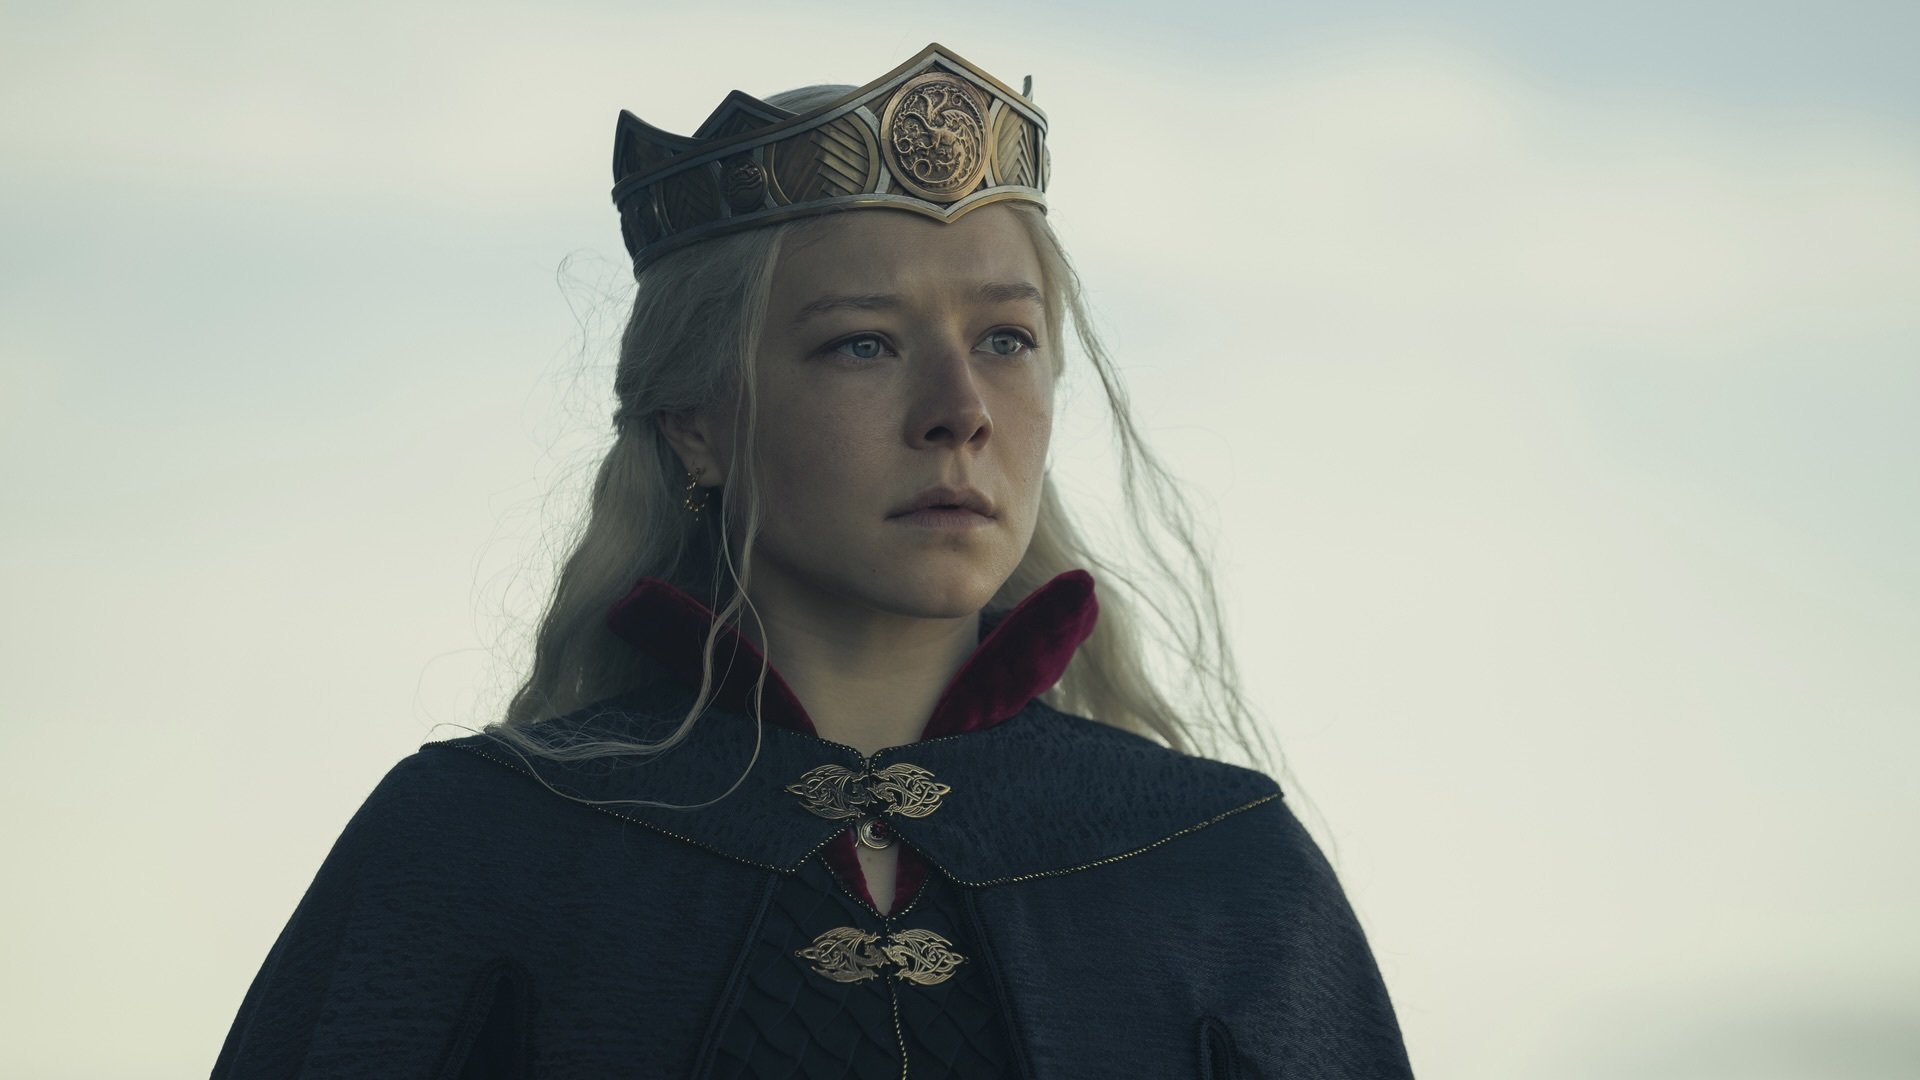 A woman with silver blonde hair in a crown and a black cloak.